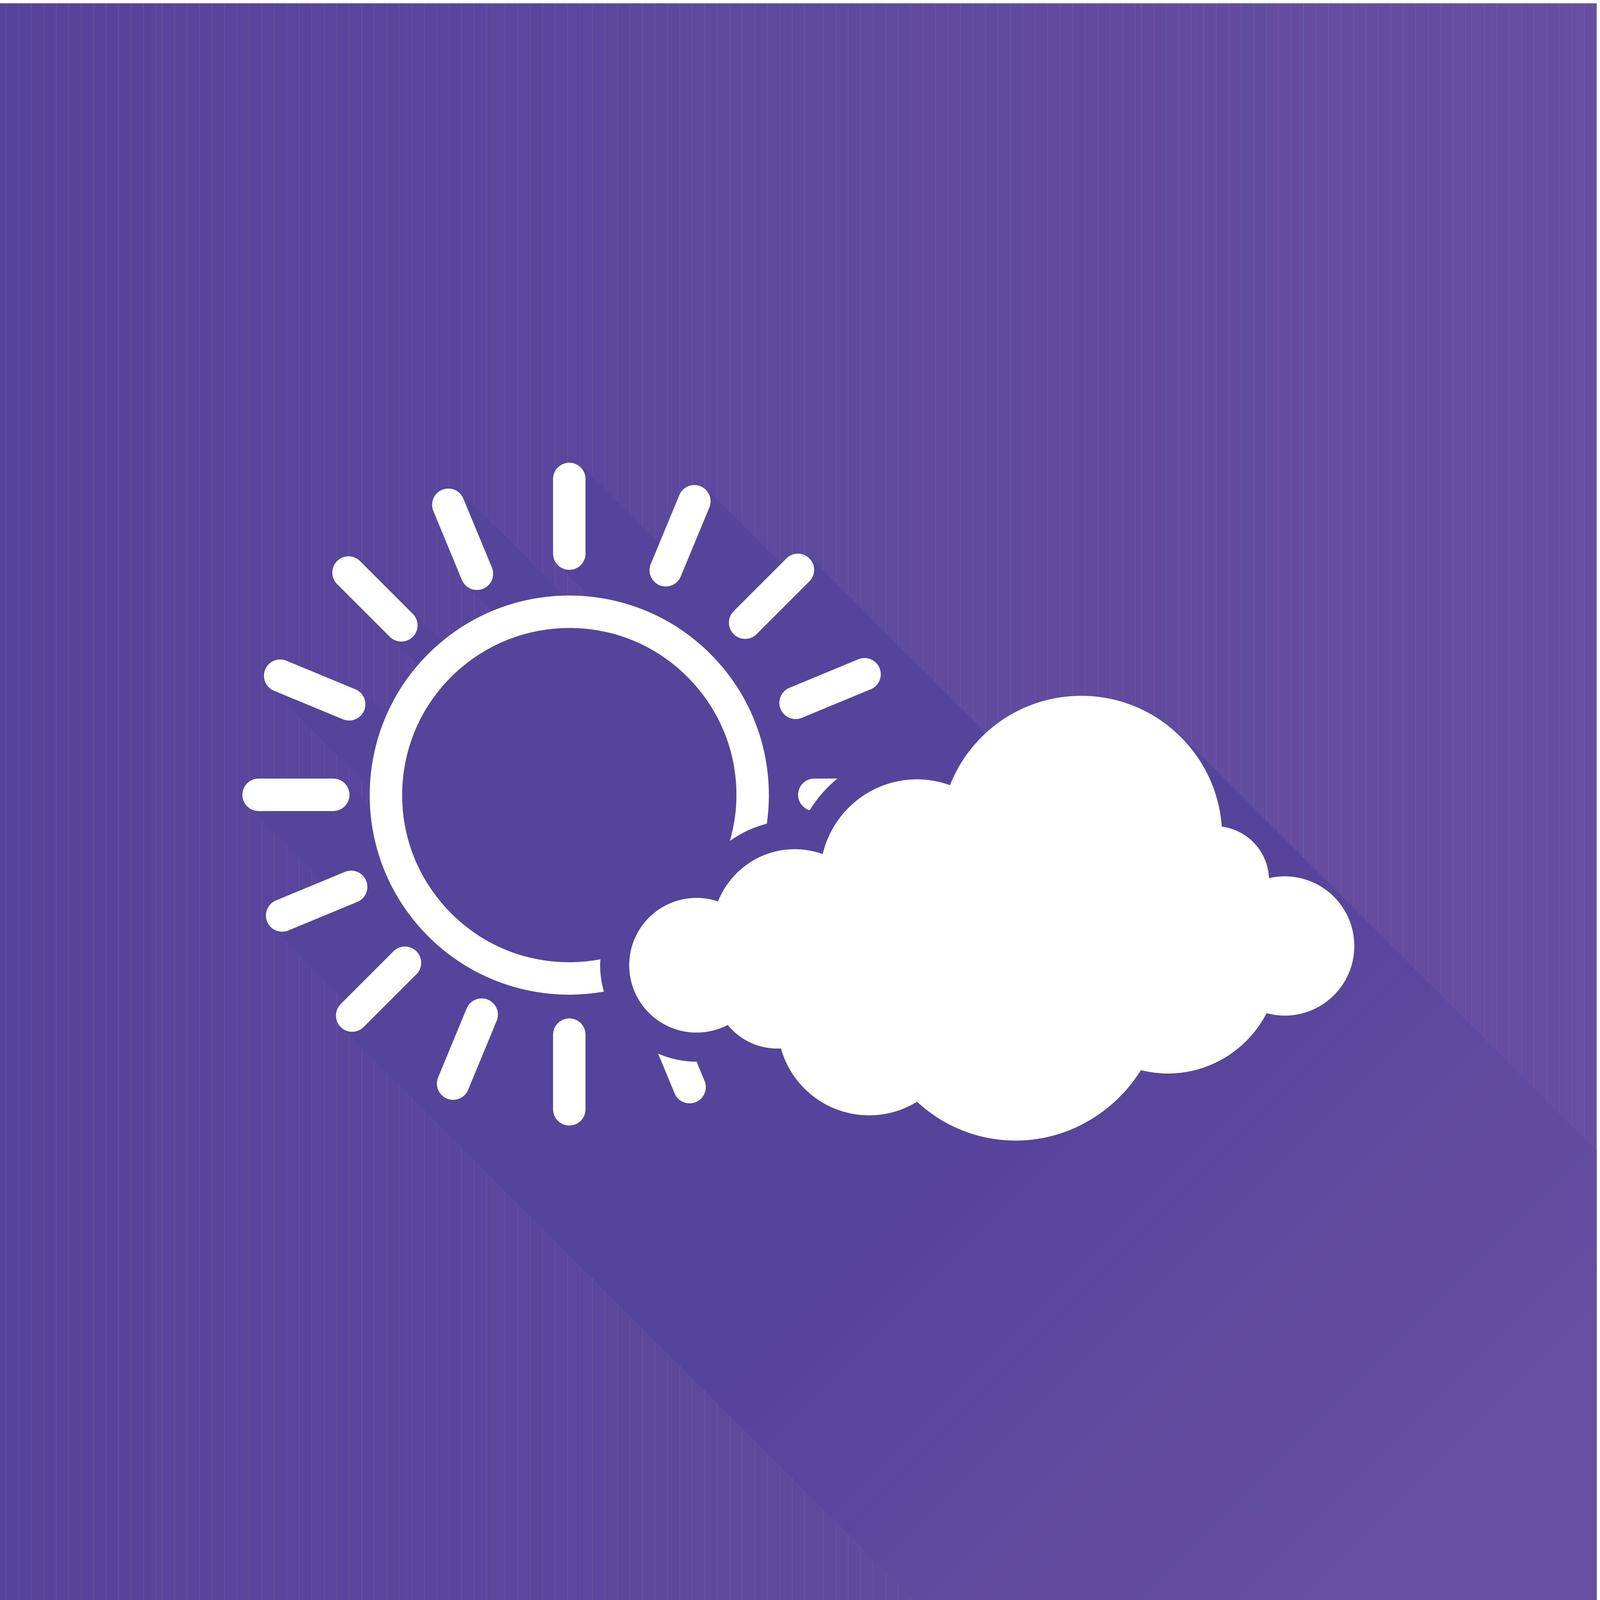 Weather forecast partly cloudy icon in Metro user interface color style. Meteorology overcast